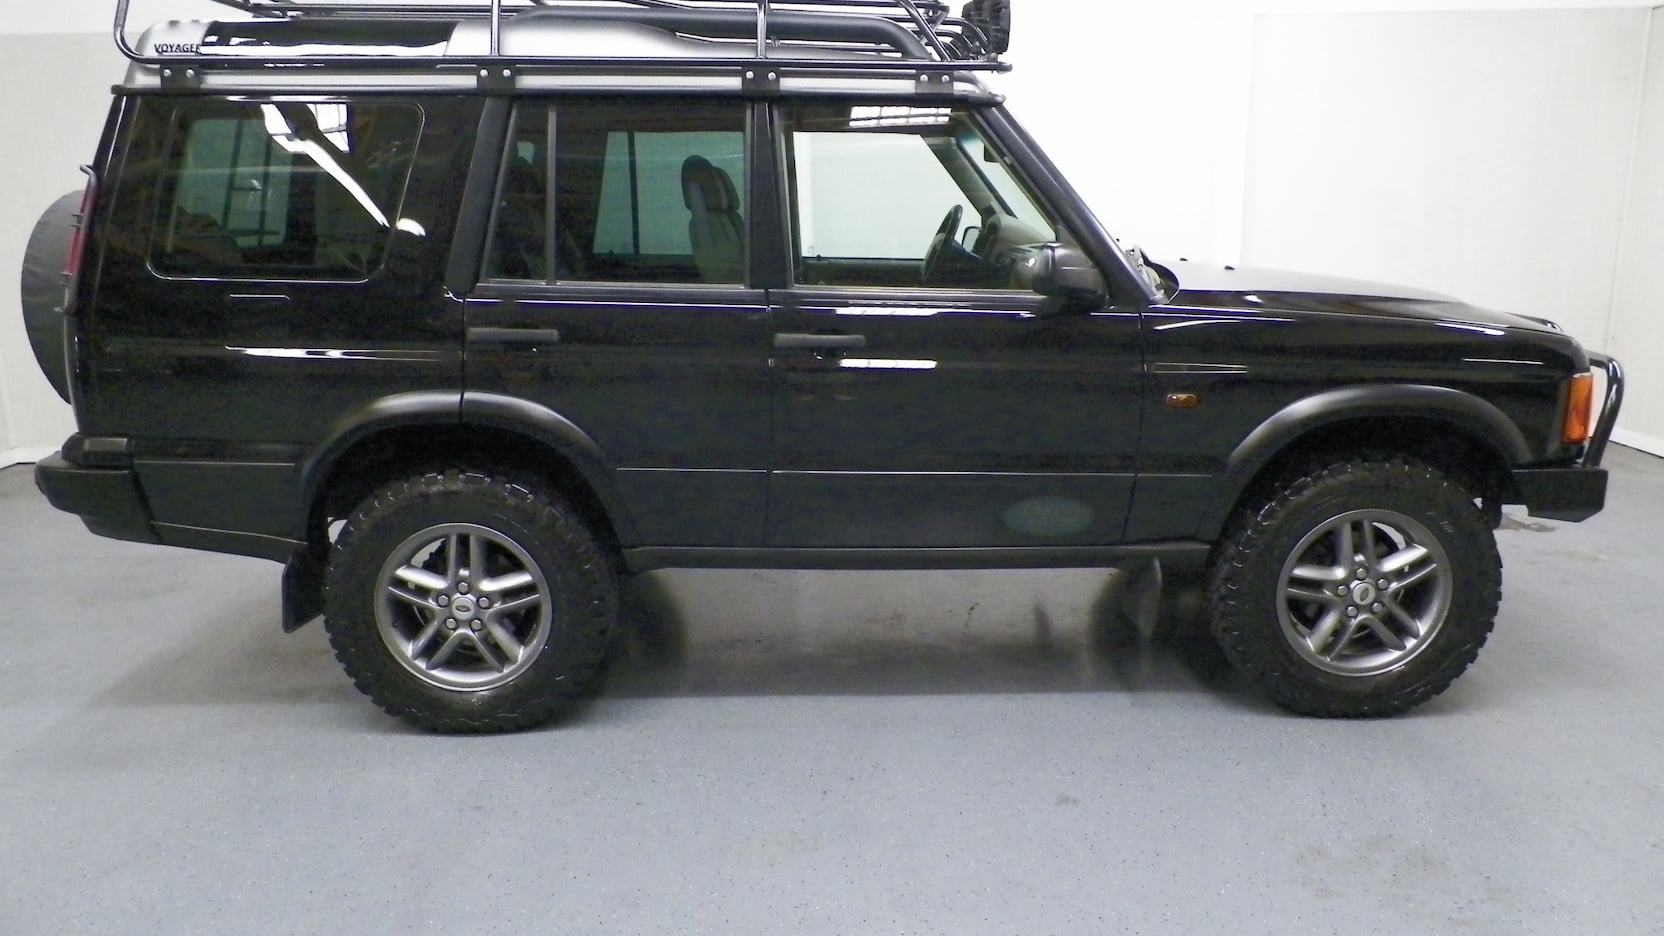 2002 Land Rover Discovery Series II | T74 | Dallas 2020